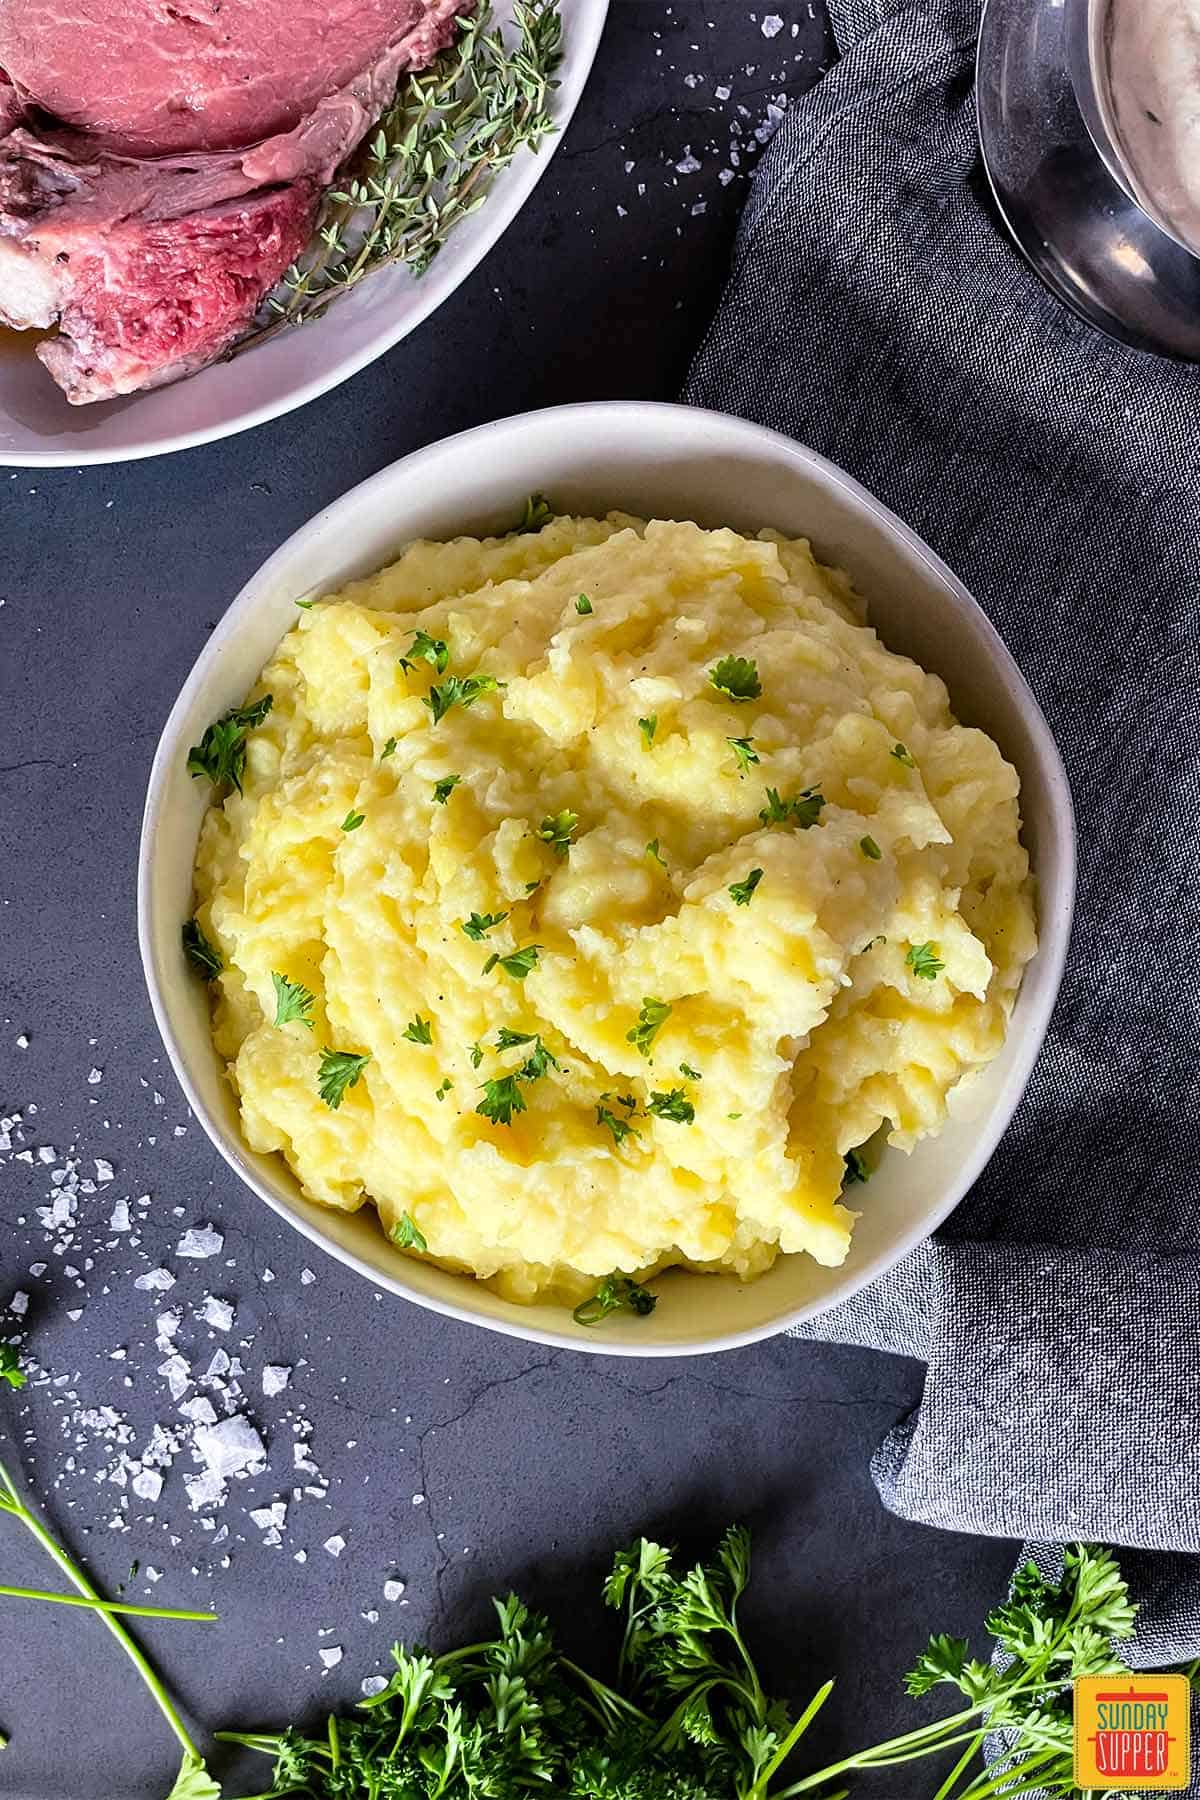 Mashed potatoes with chives in a white bowl